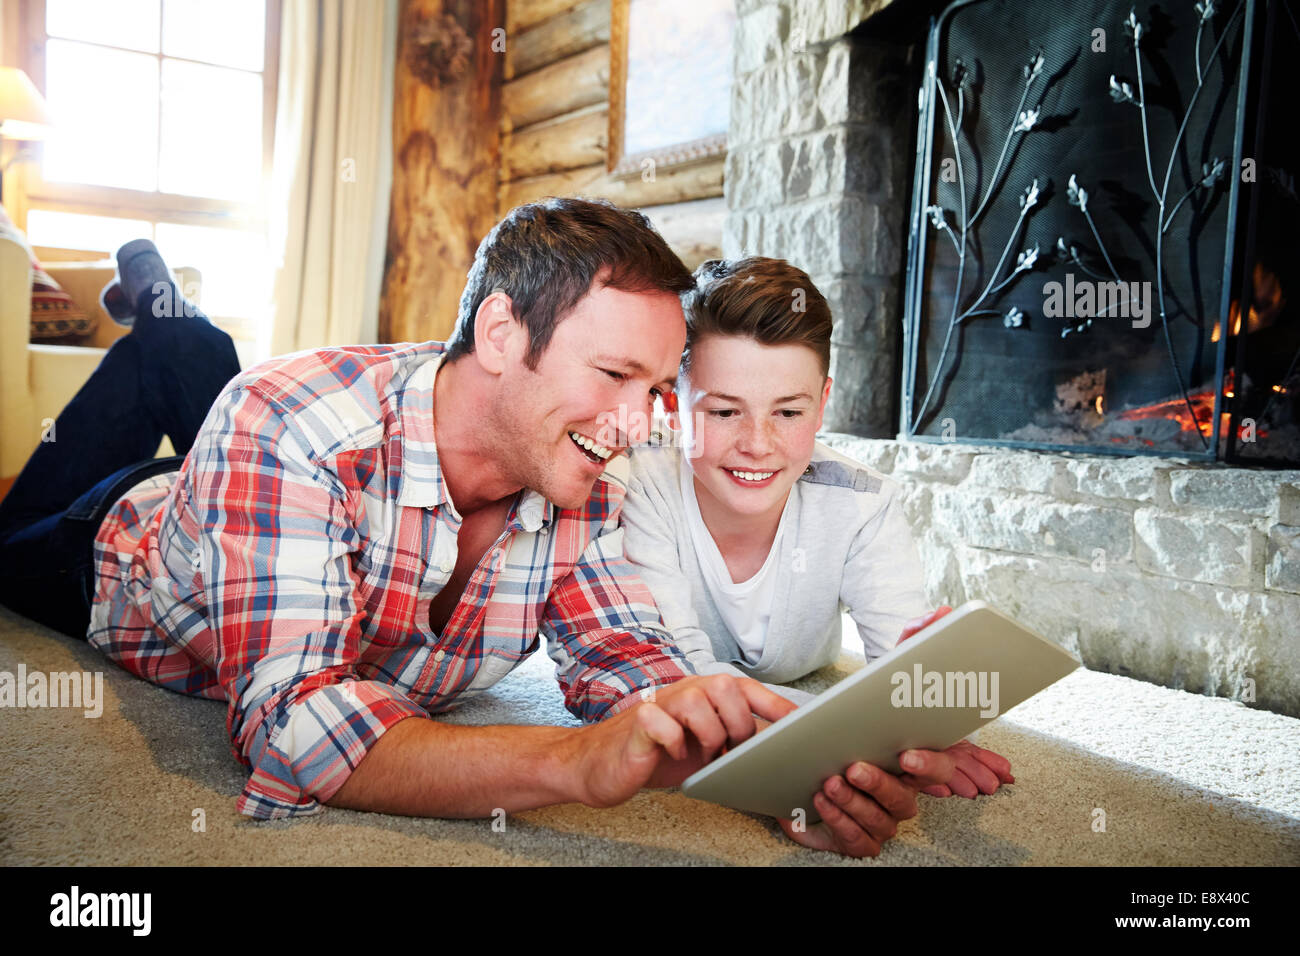 Father and son playing with digital tablet together Stock Photo